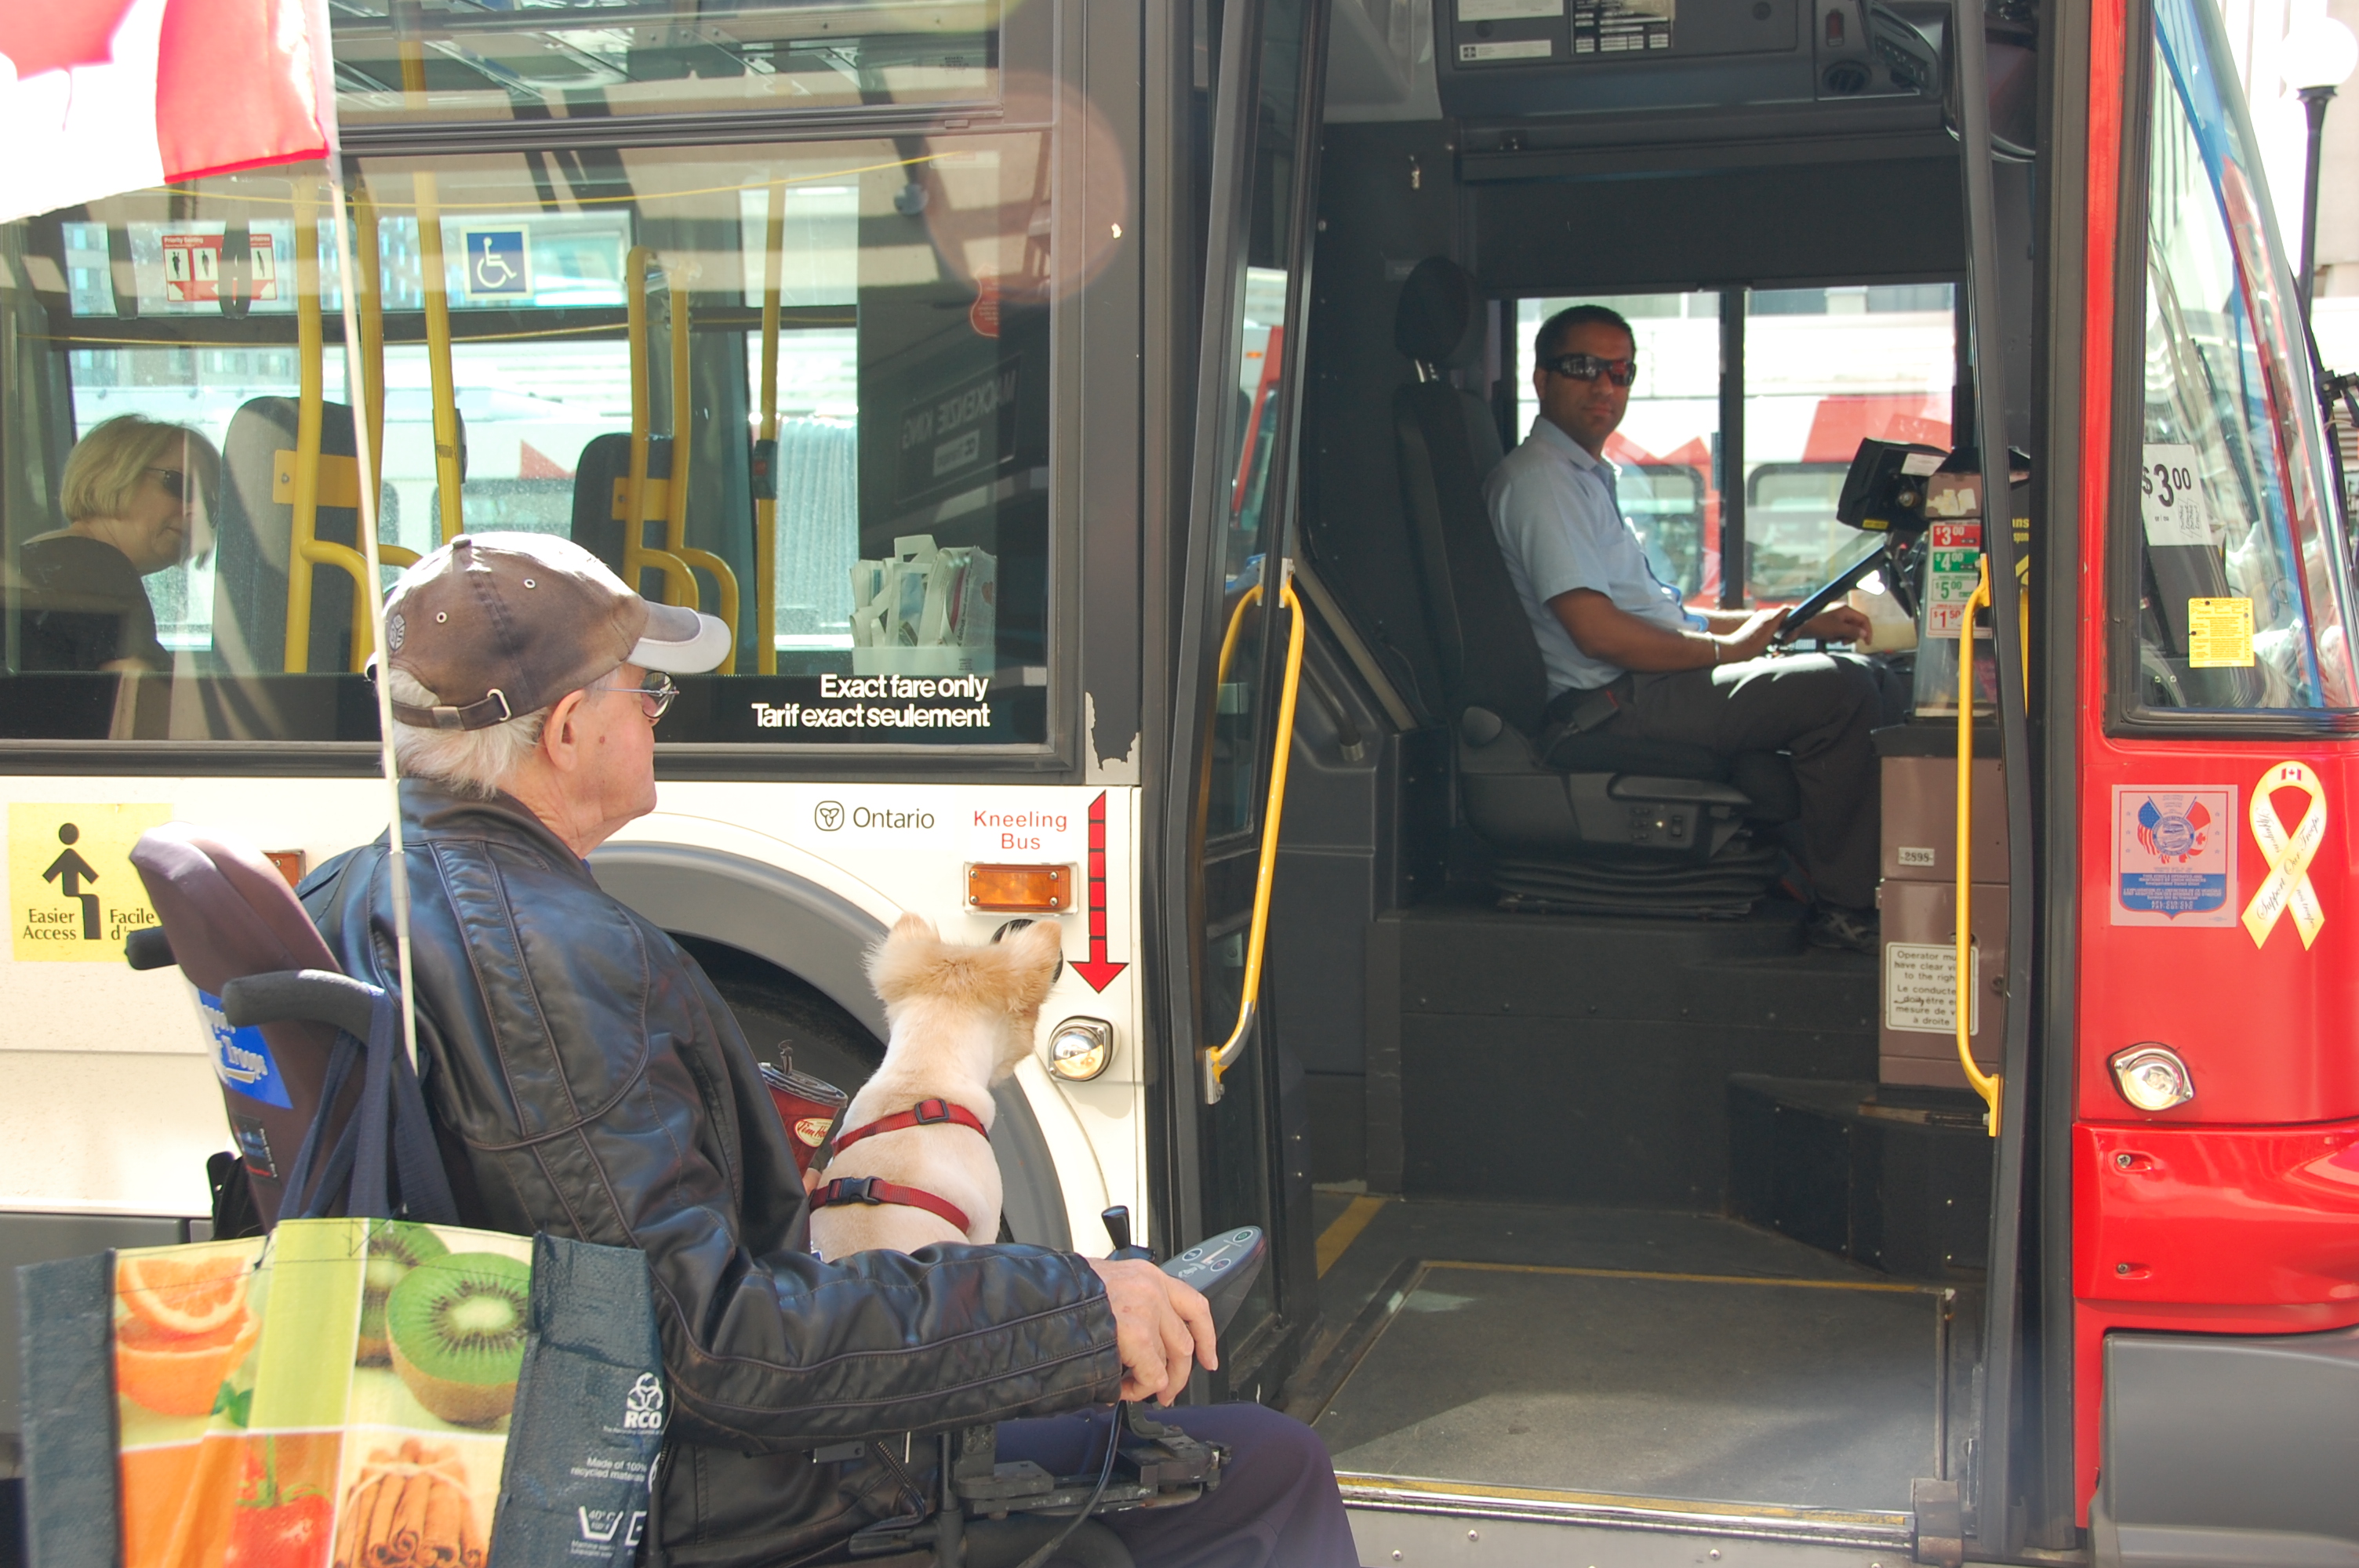 Mature rider in a wheelchair boarding a low-floor (kneeling) bus